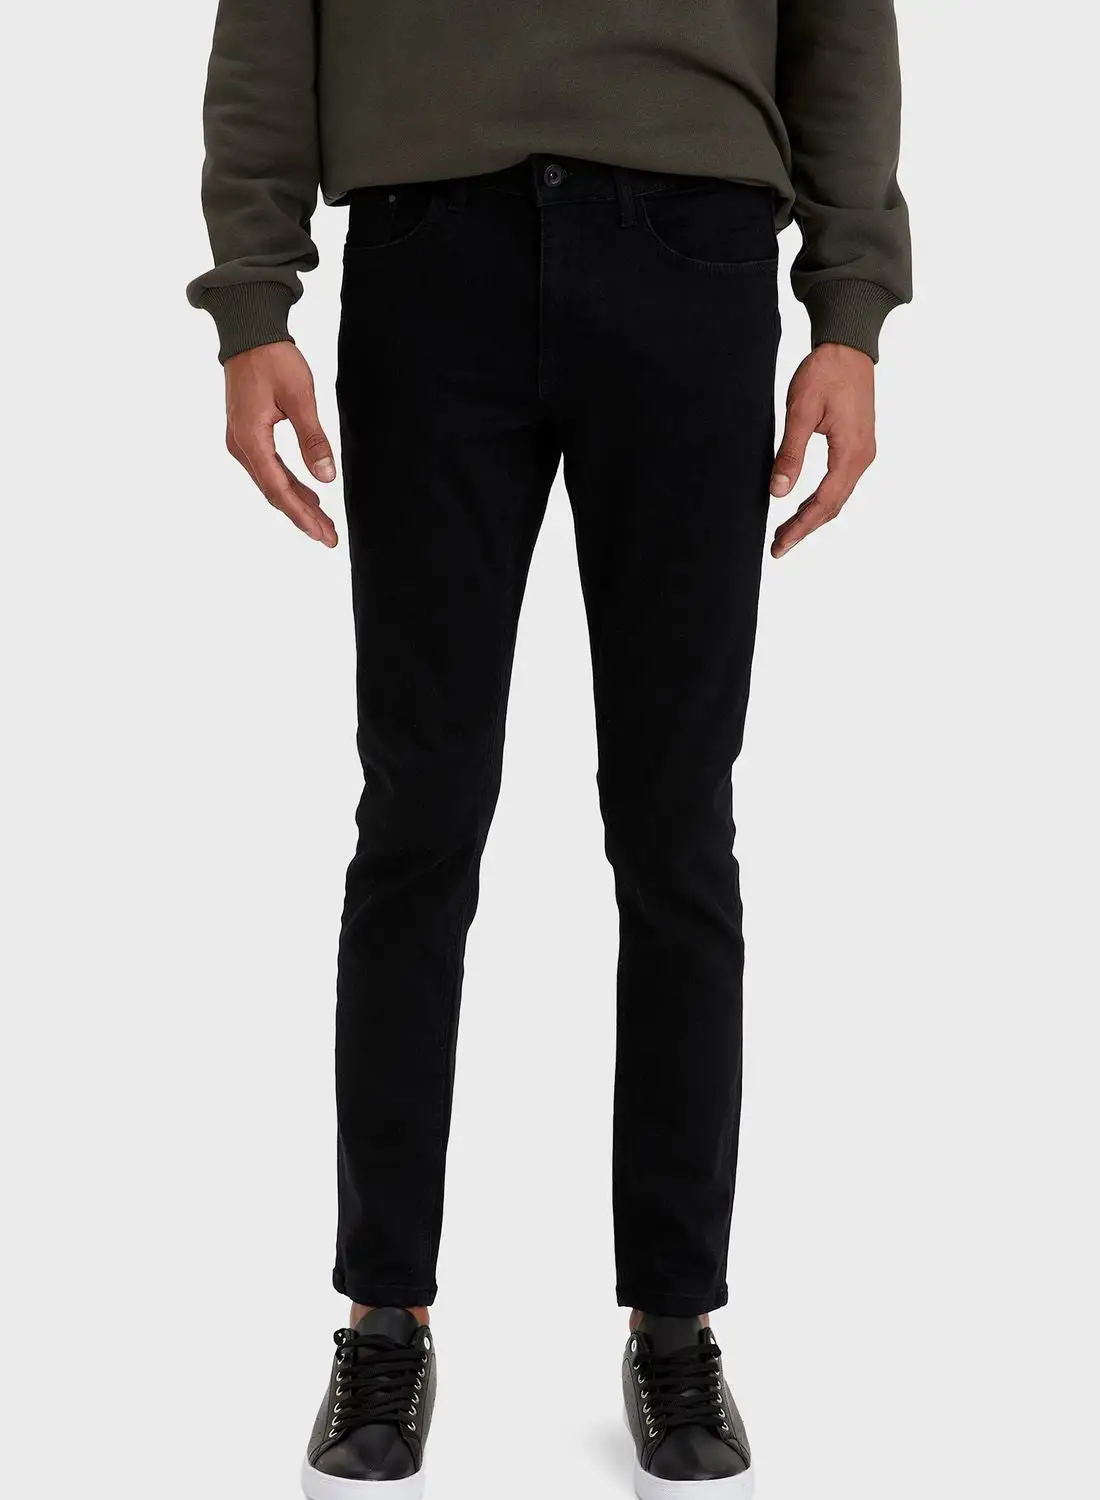 DeFacto Rinse Skinny Fit Jeans